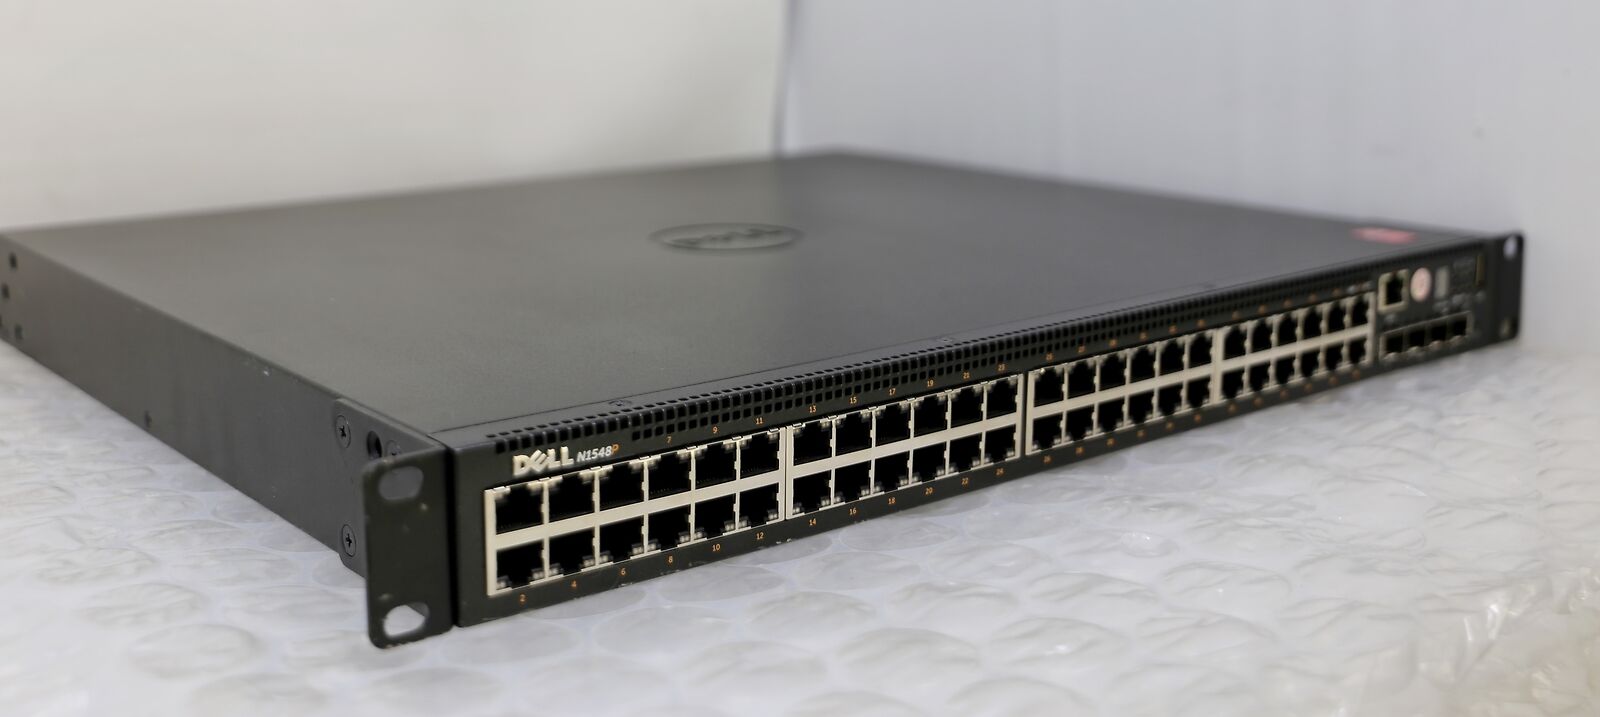 DELL N1548P - 48-Port 1Gb 1704W PoE+ / 4-Port 10Gb SFP+ Managed Stackable Switch